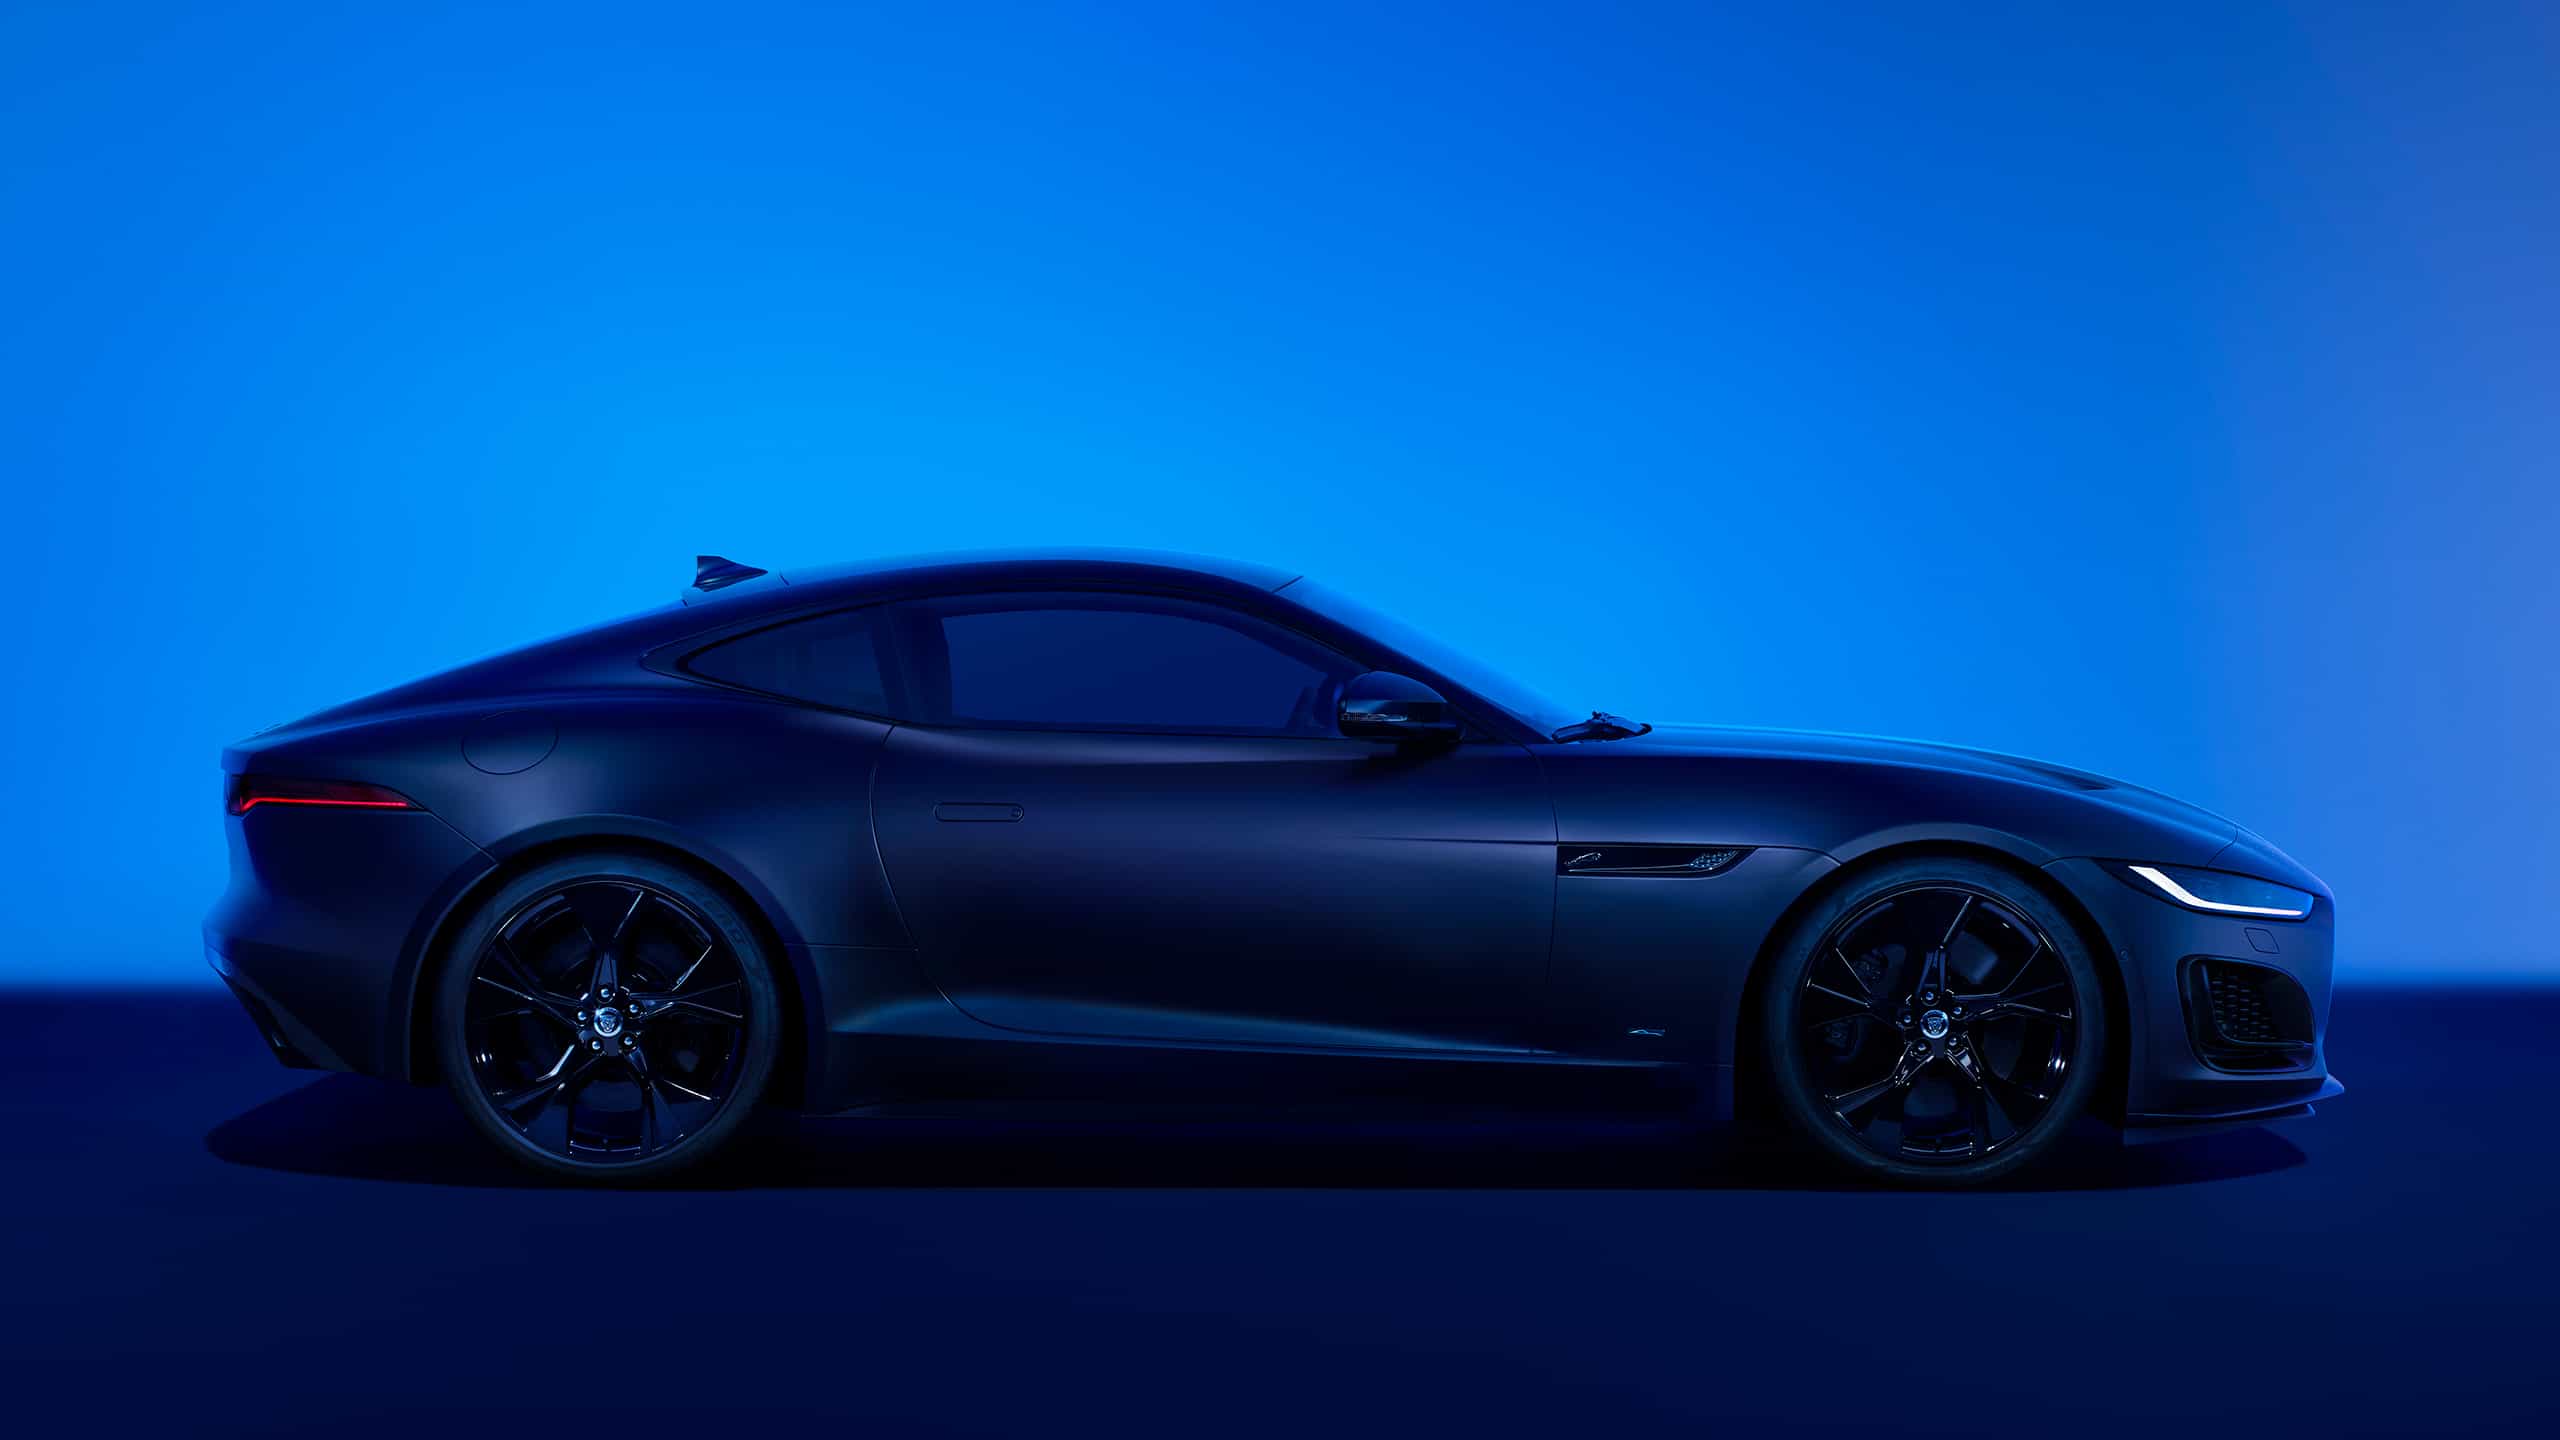 Representation of F-TYPE on blue background